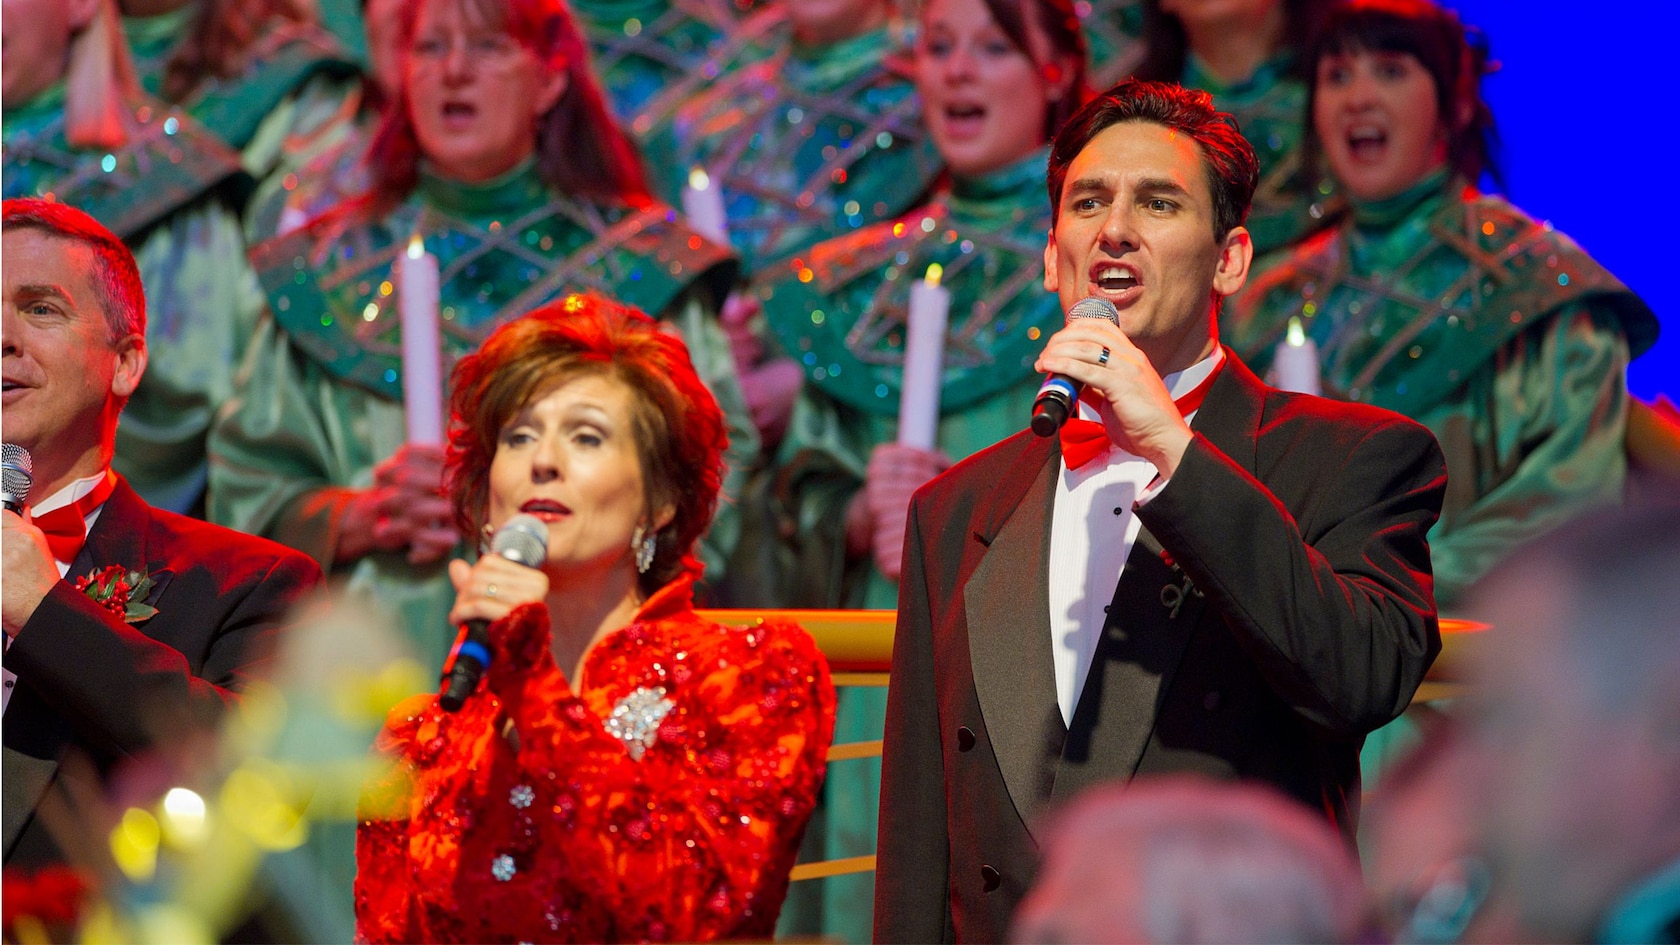 Candlelight Processional/Disney